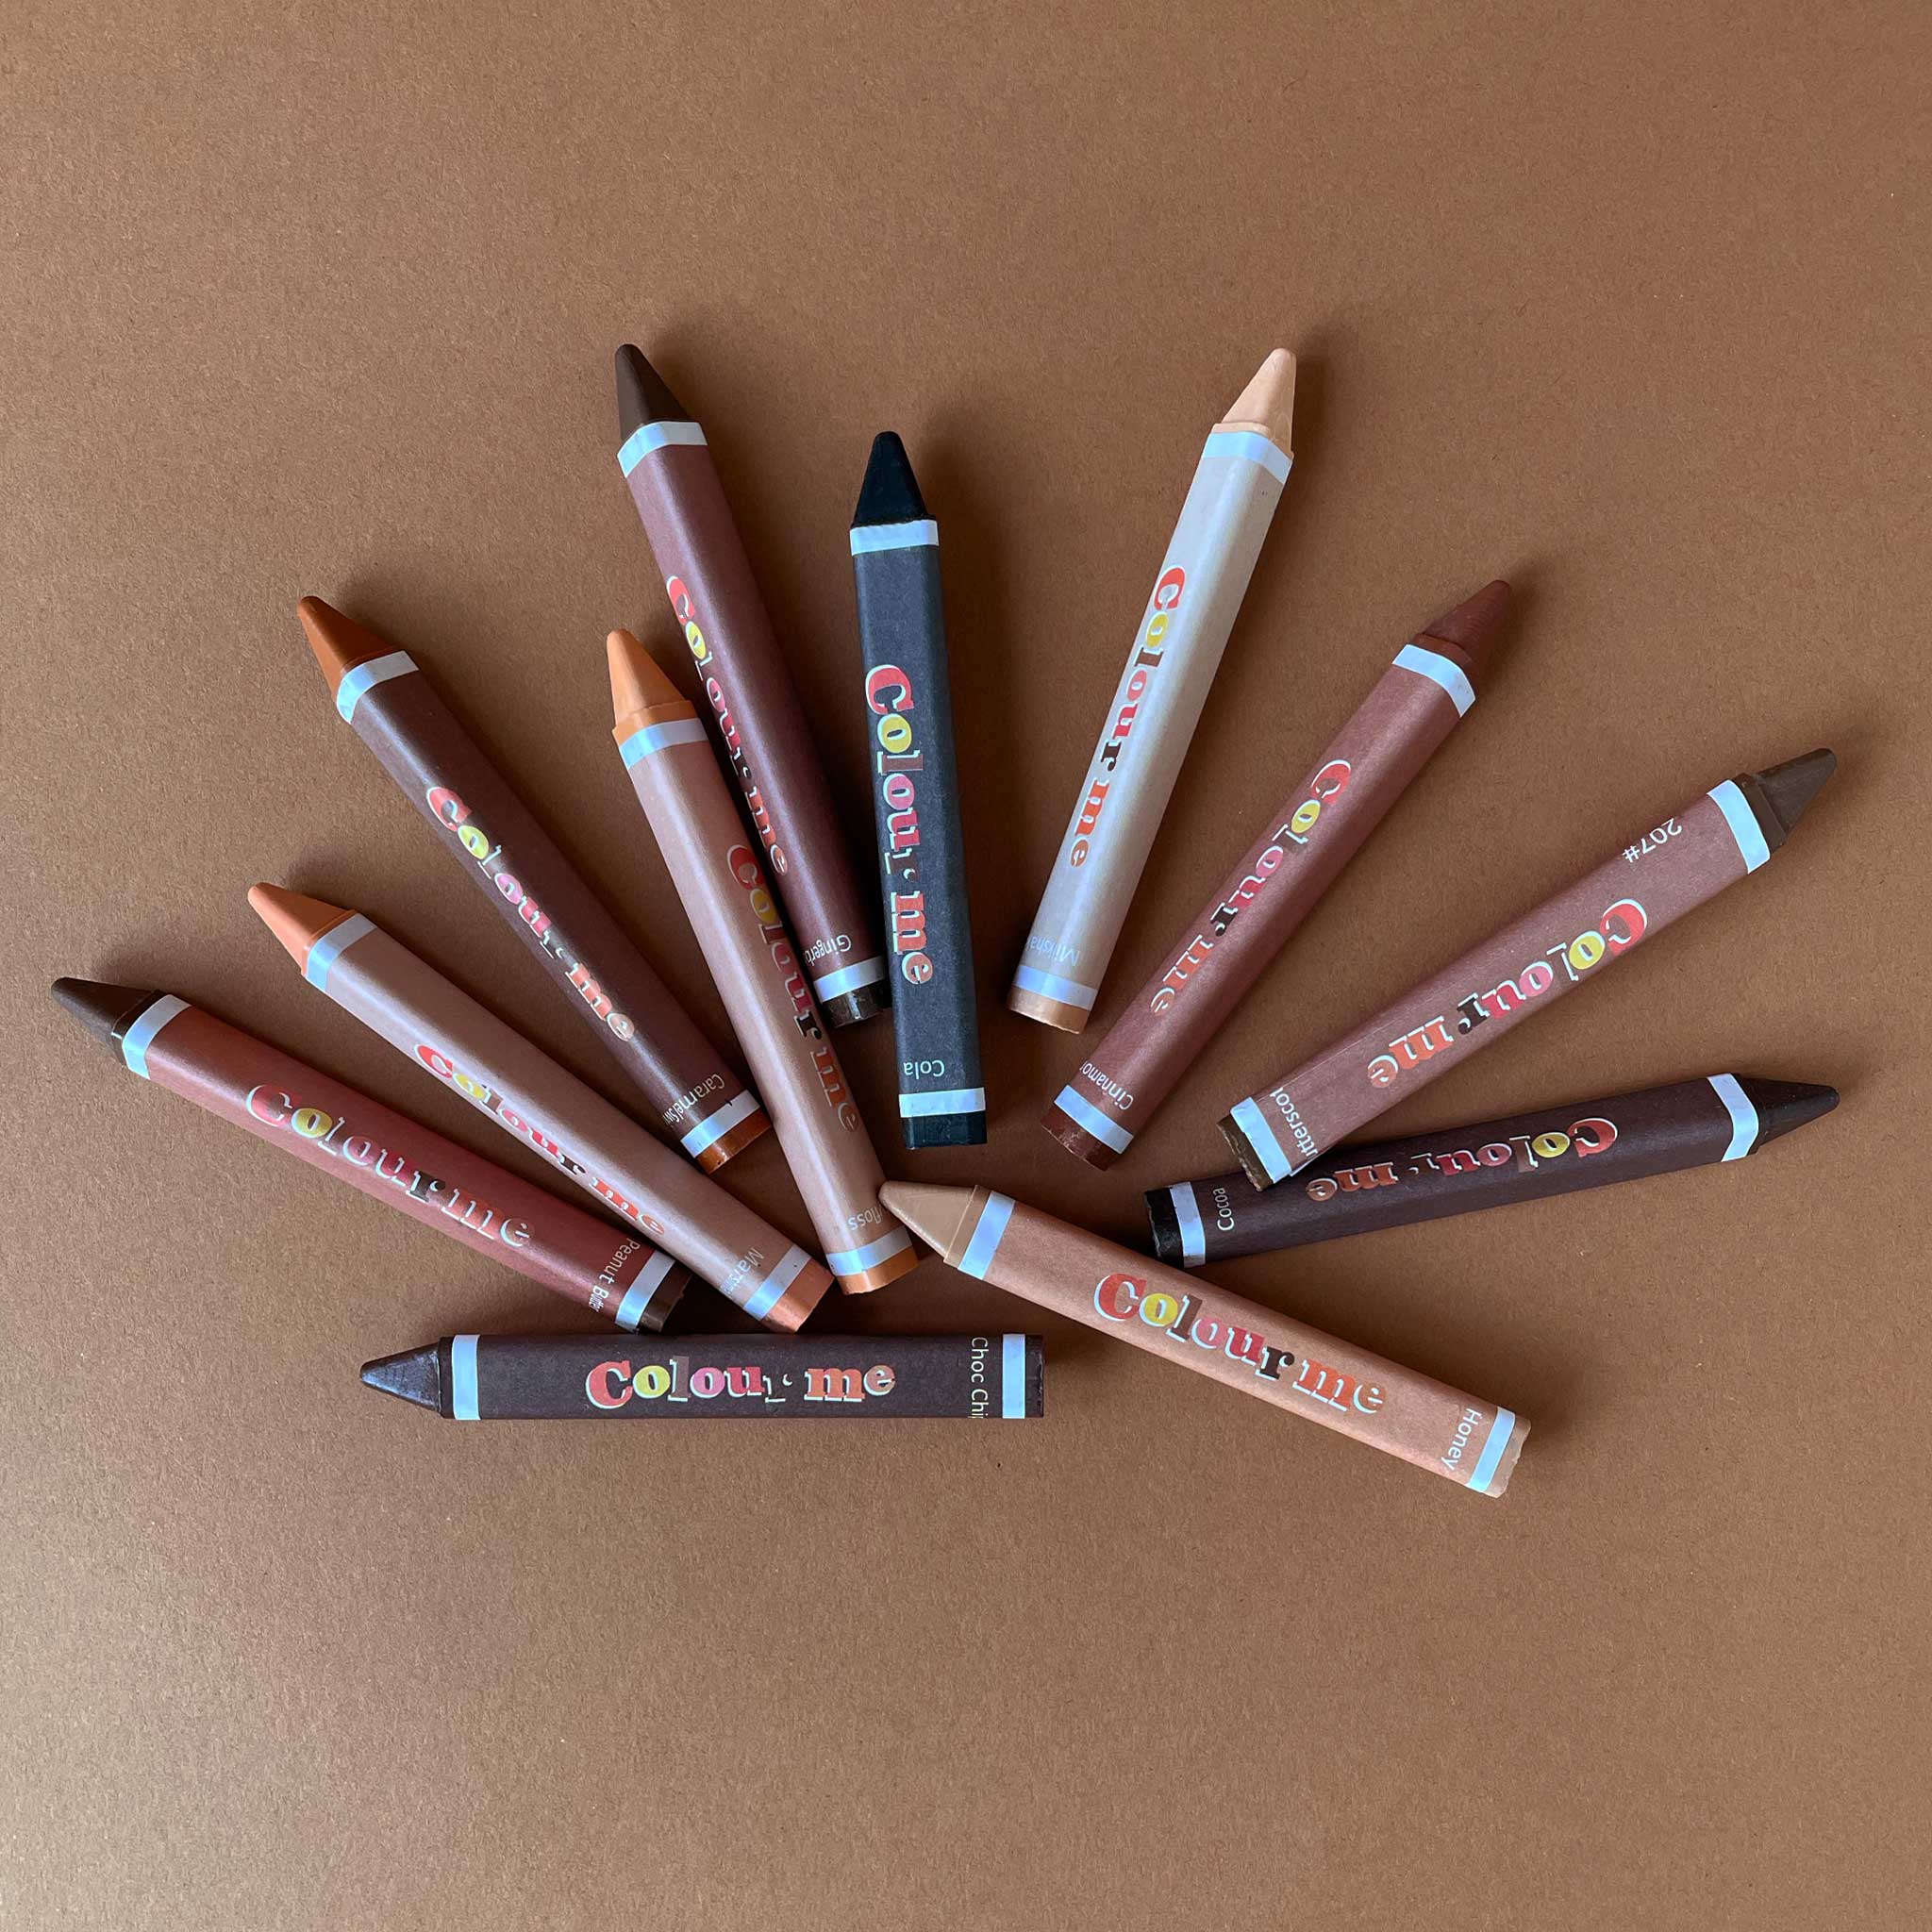 Crayola launches different skin tones crayons to foster representation